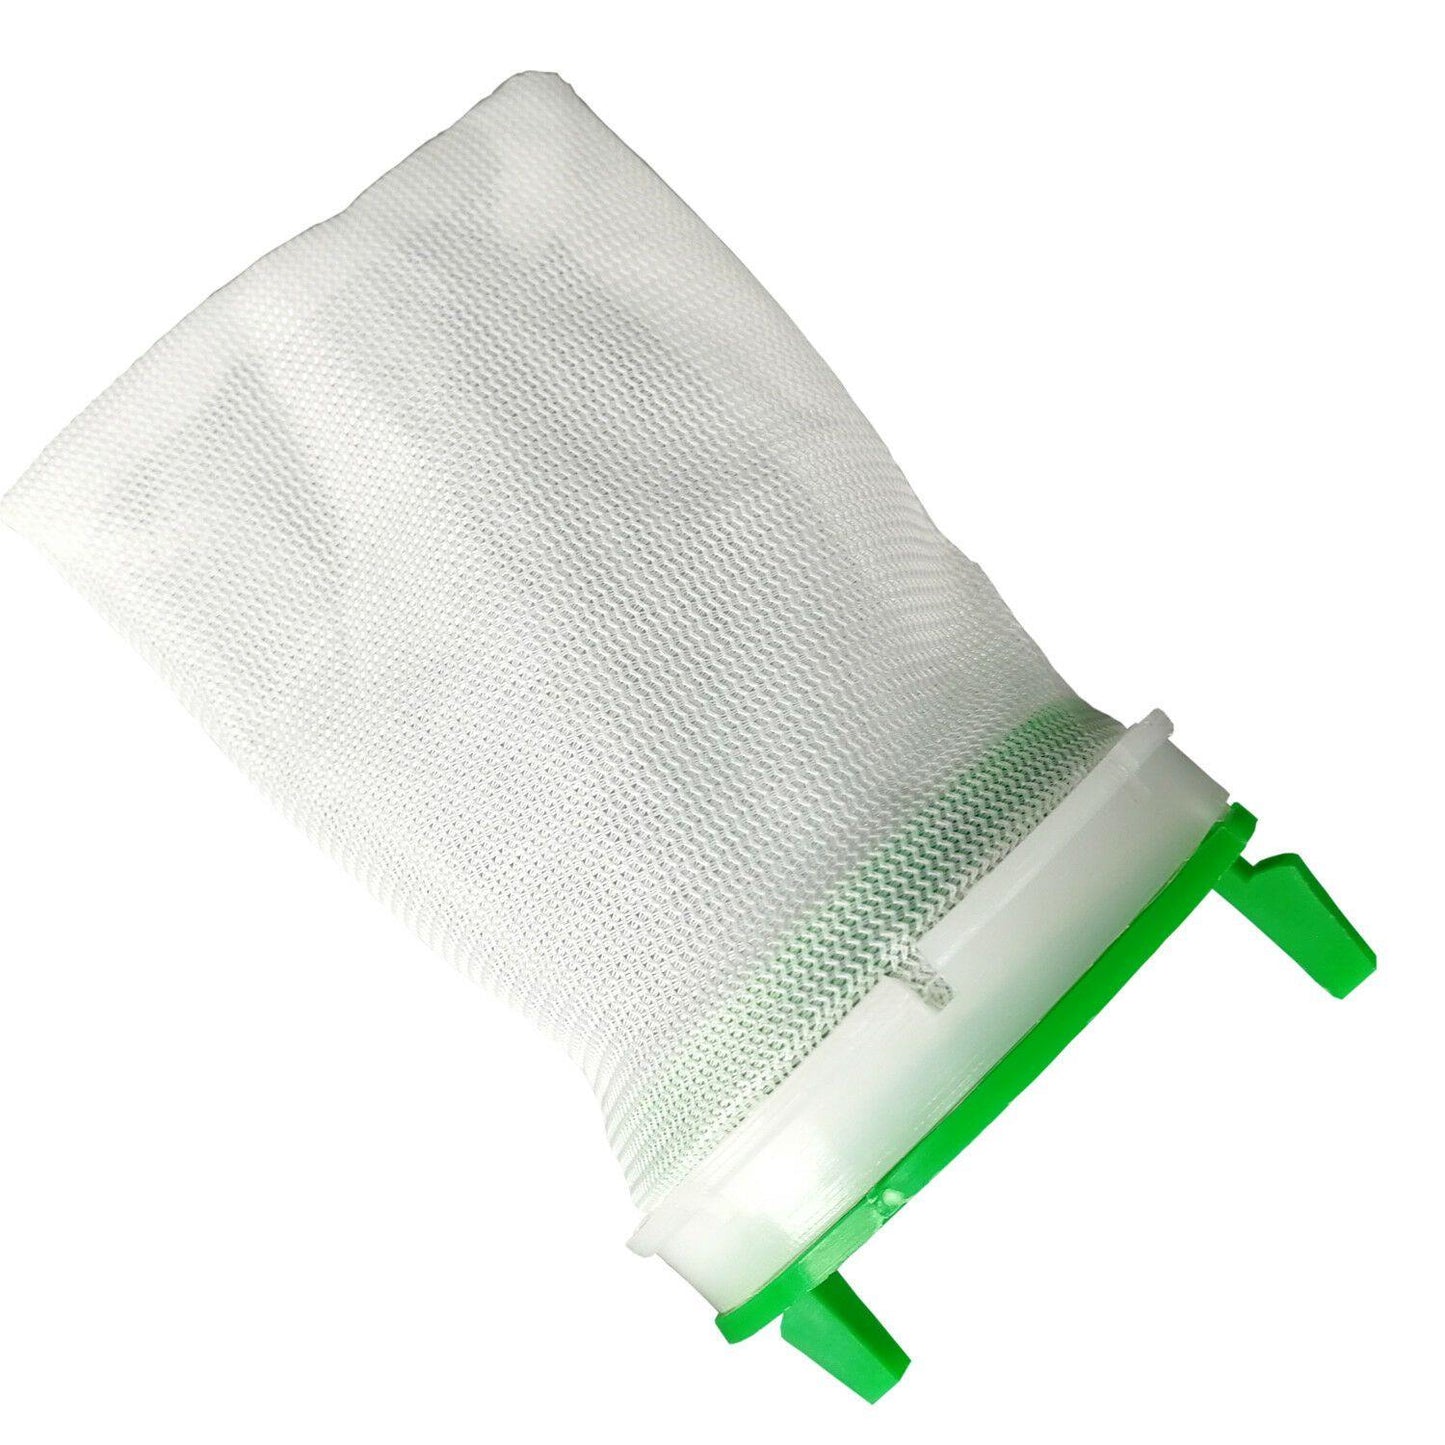 4X Washing Machine Lint Filter Bag For Simpson Hoover Westinghouse P/N 05642573 Sparesbarn